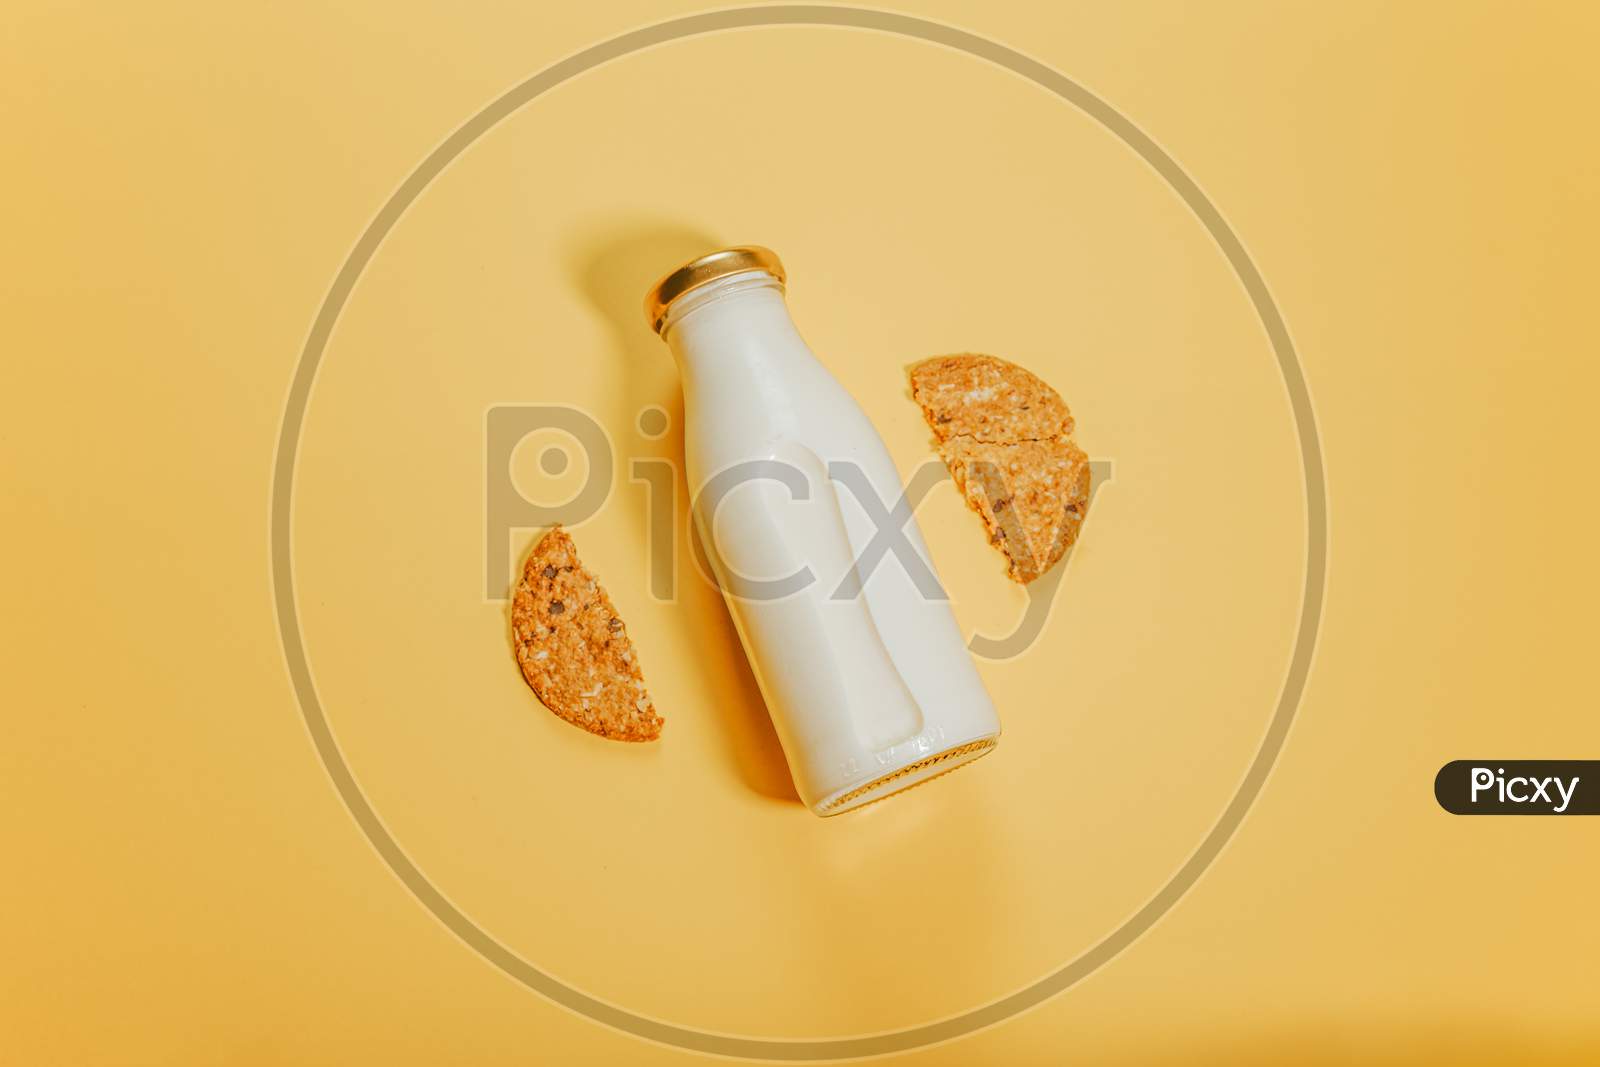 A Bottle Of Milk Surrounded By Two Pieces Of One Cookie